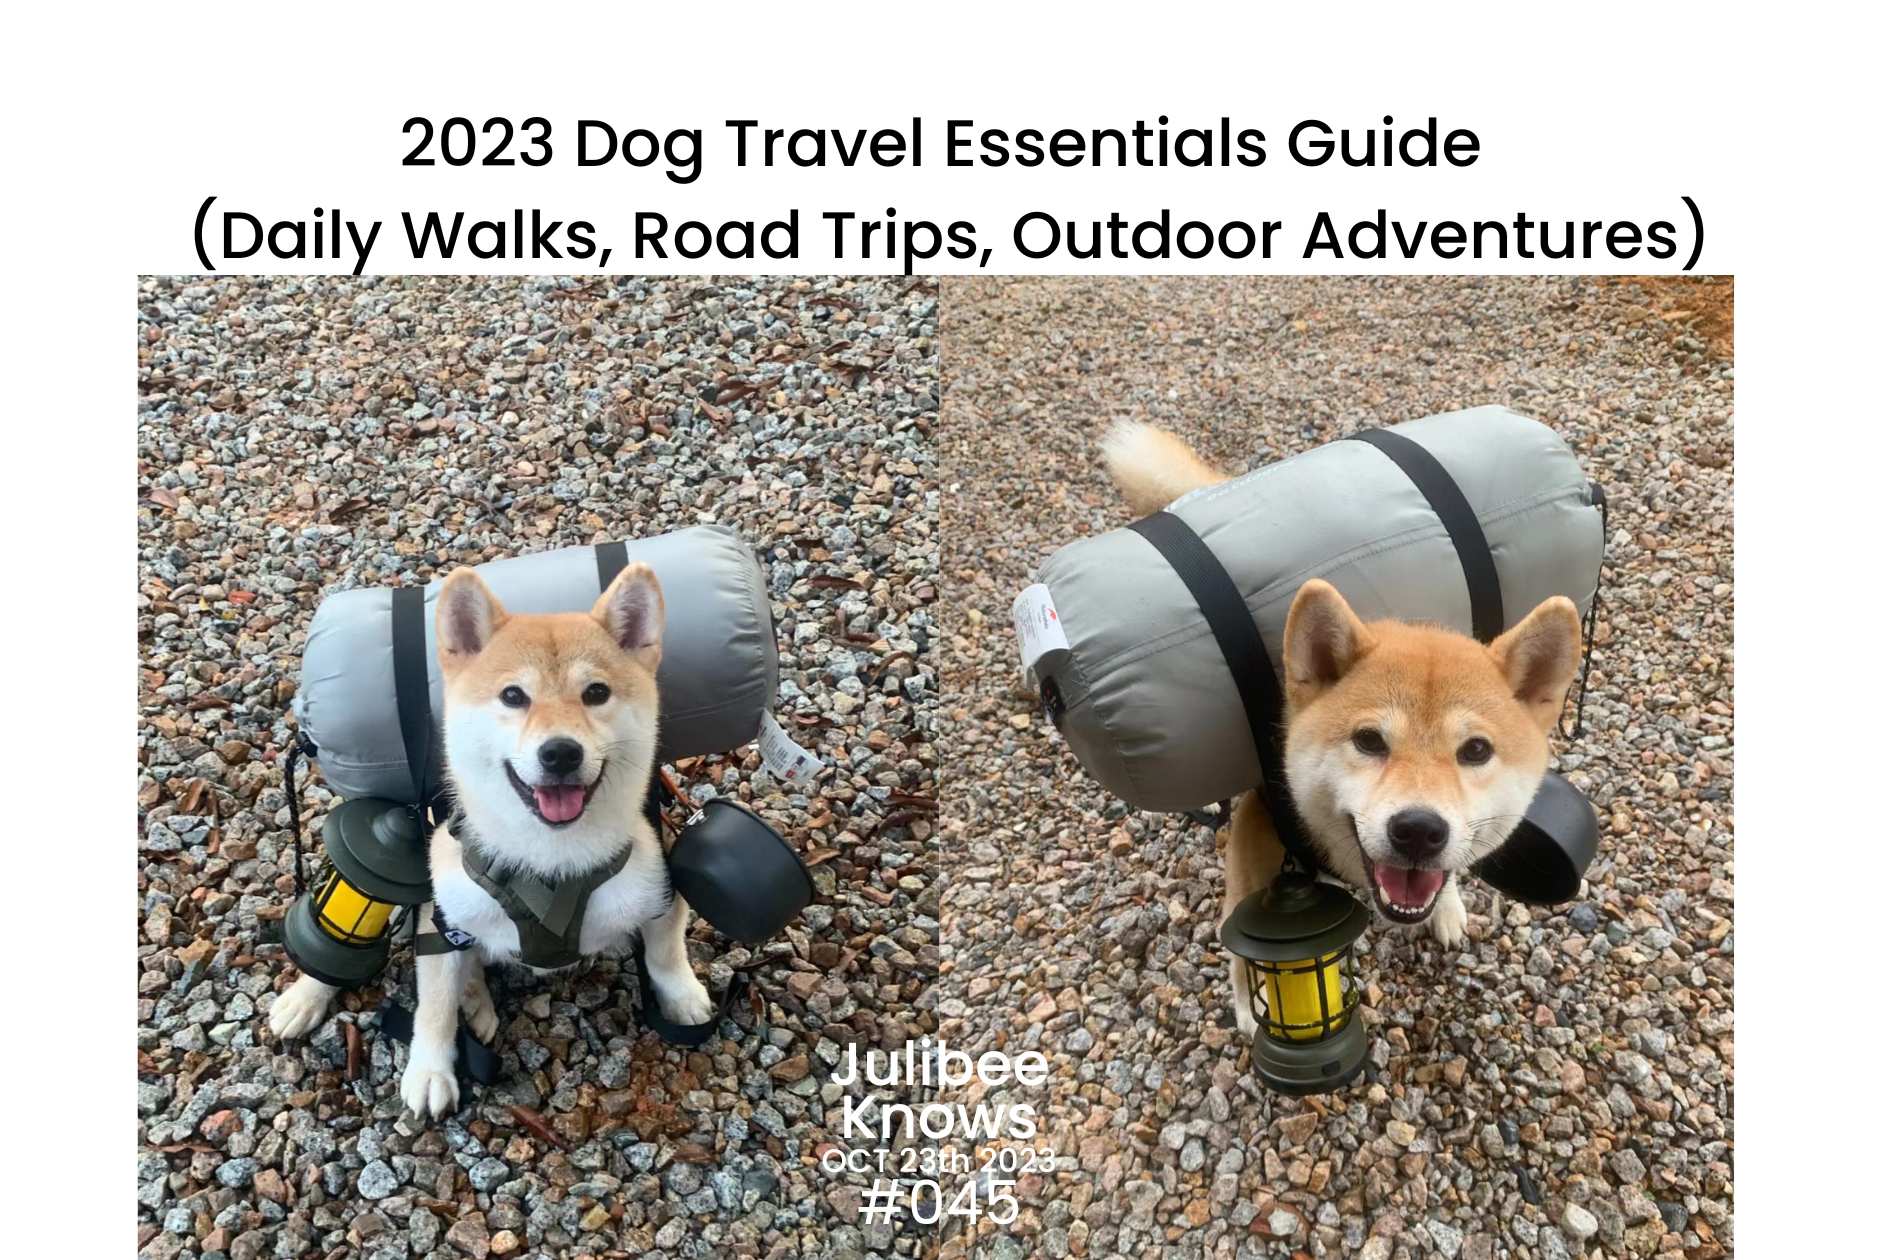 2023 Dog Travel Essentials Guide (Daily Walks, Road Trips, Outdoor Adventures)